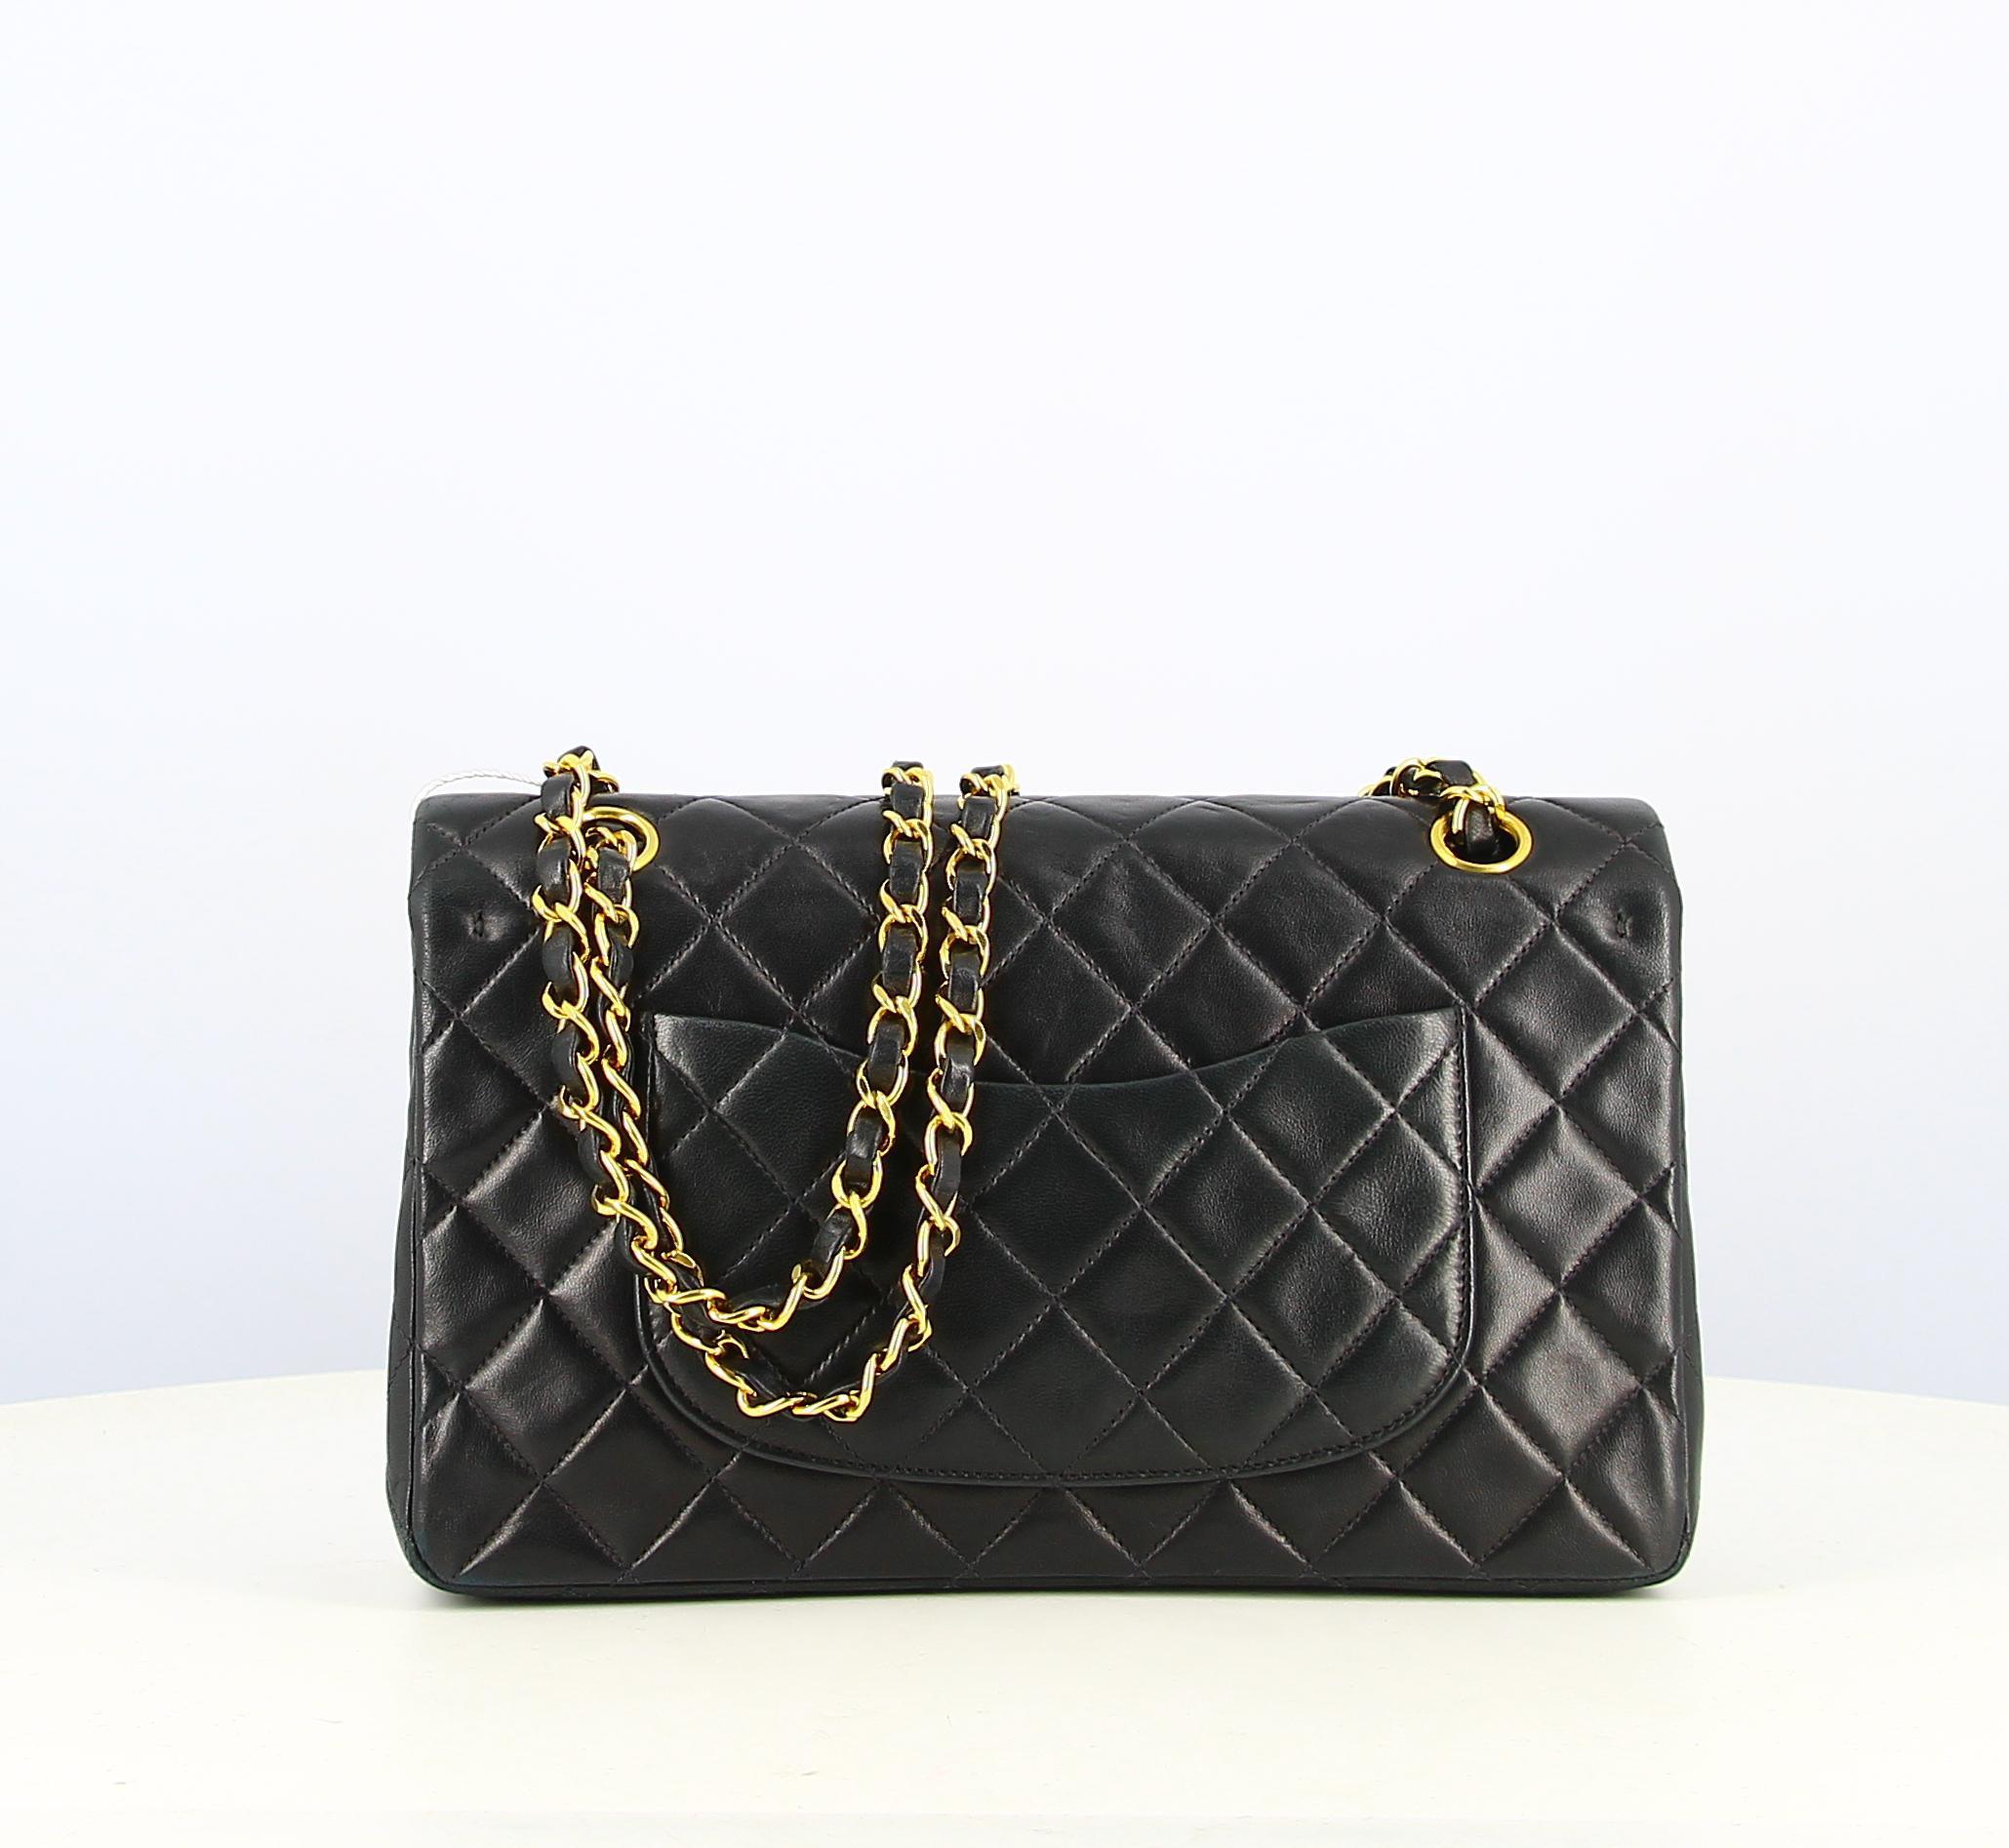 1991-1993 Chanel Timeless Black Quilted Leather Bag 2